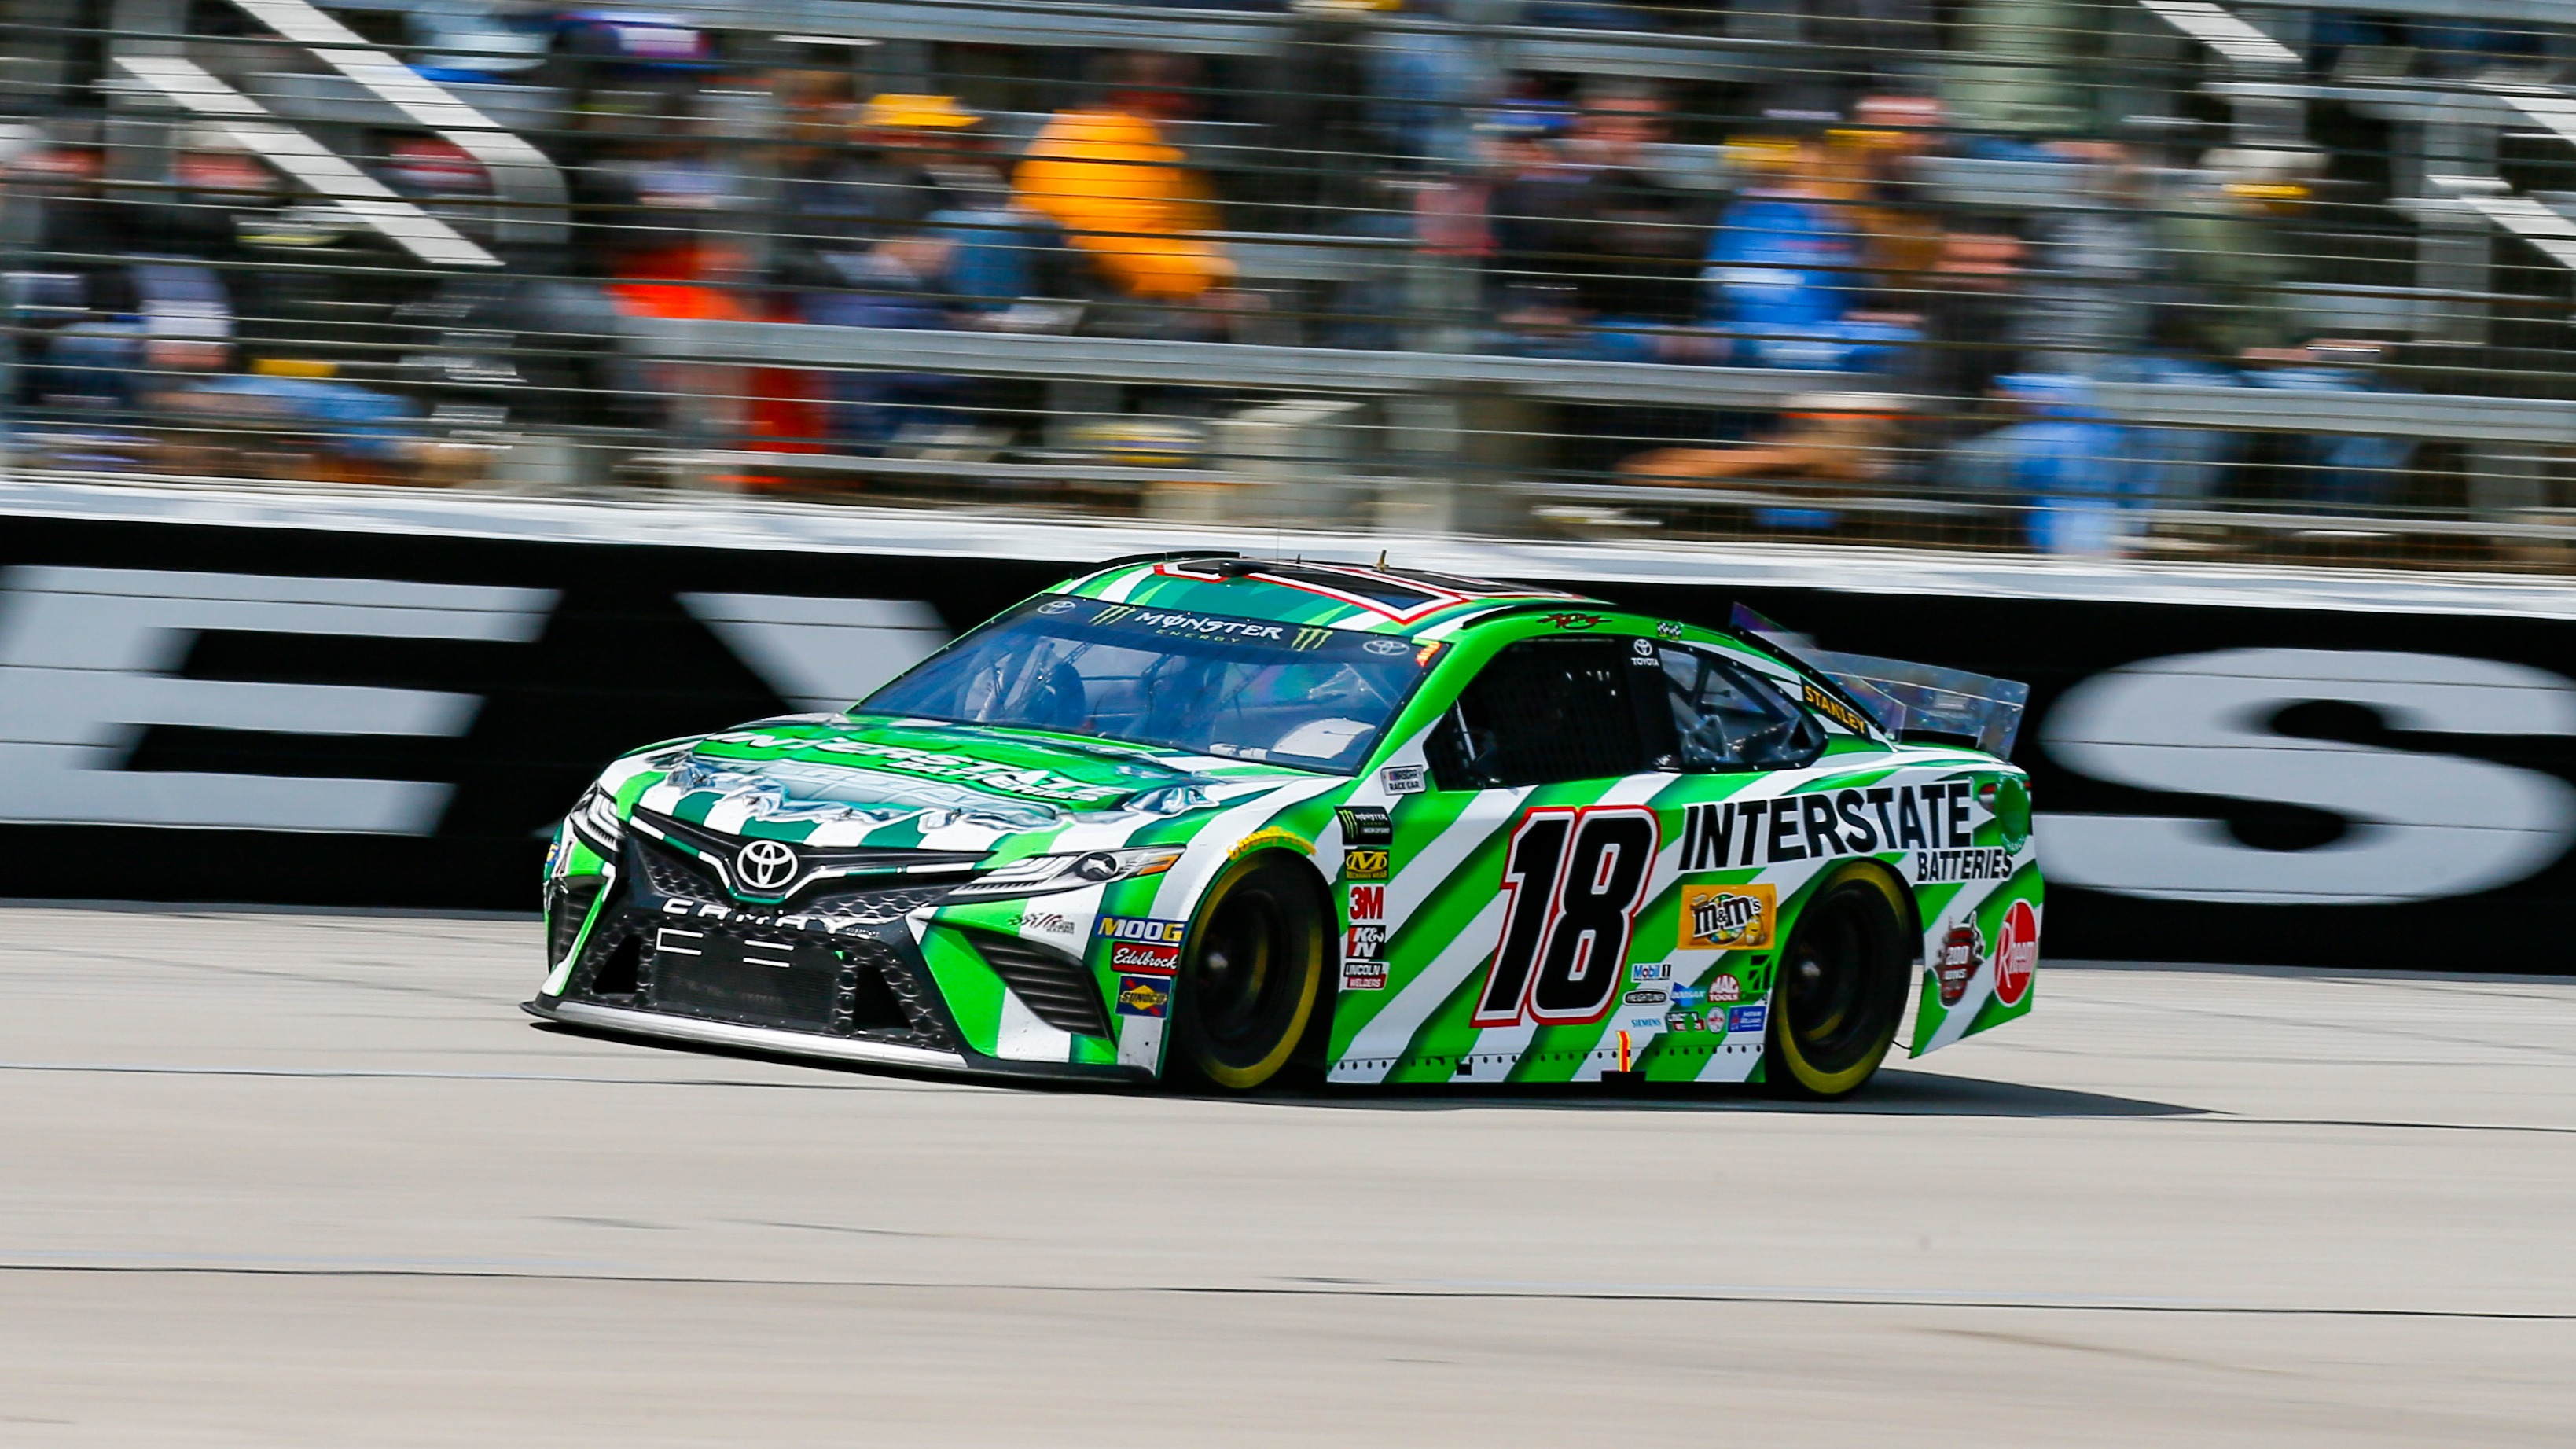 Odds to win NASCAR Cup Series championship Kyle Busch now clear